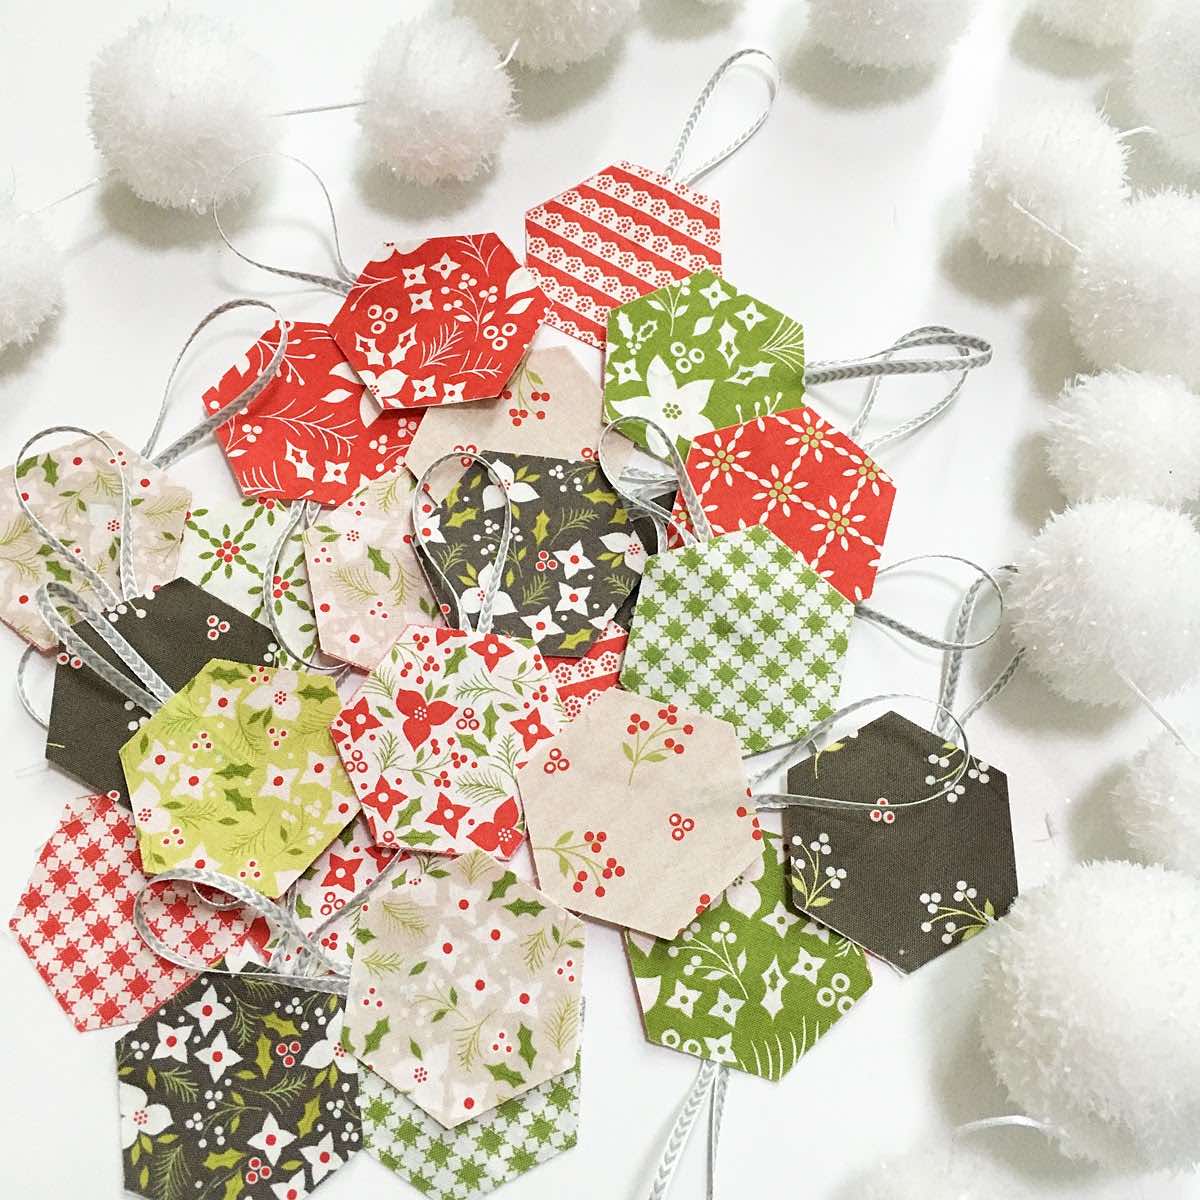 8-perfectly hexagons cut for ornaments next to white garland